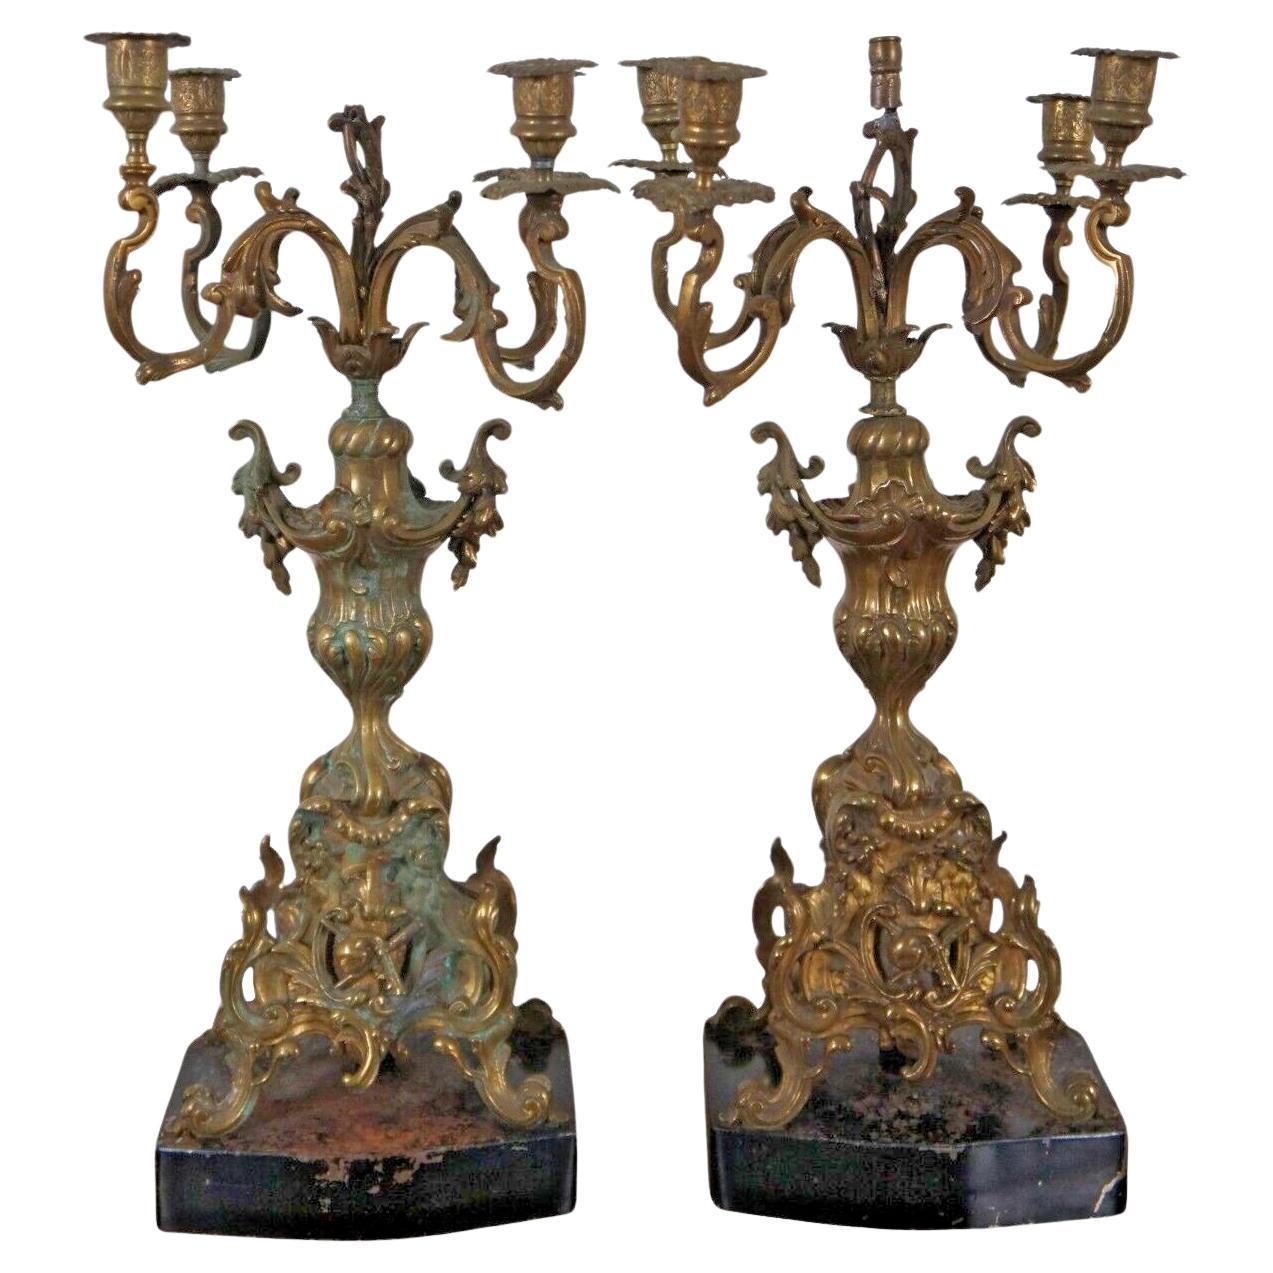 2 Antique Baroque 4 Arm Candelabras Candle Holders Converted Lamps 20"